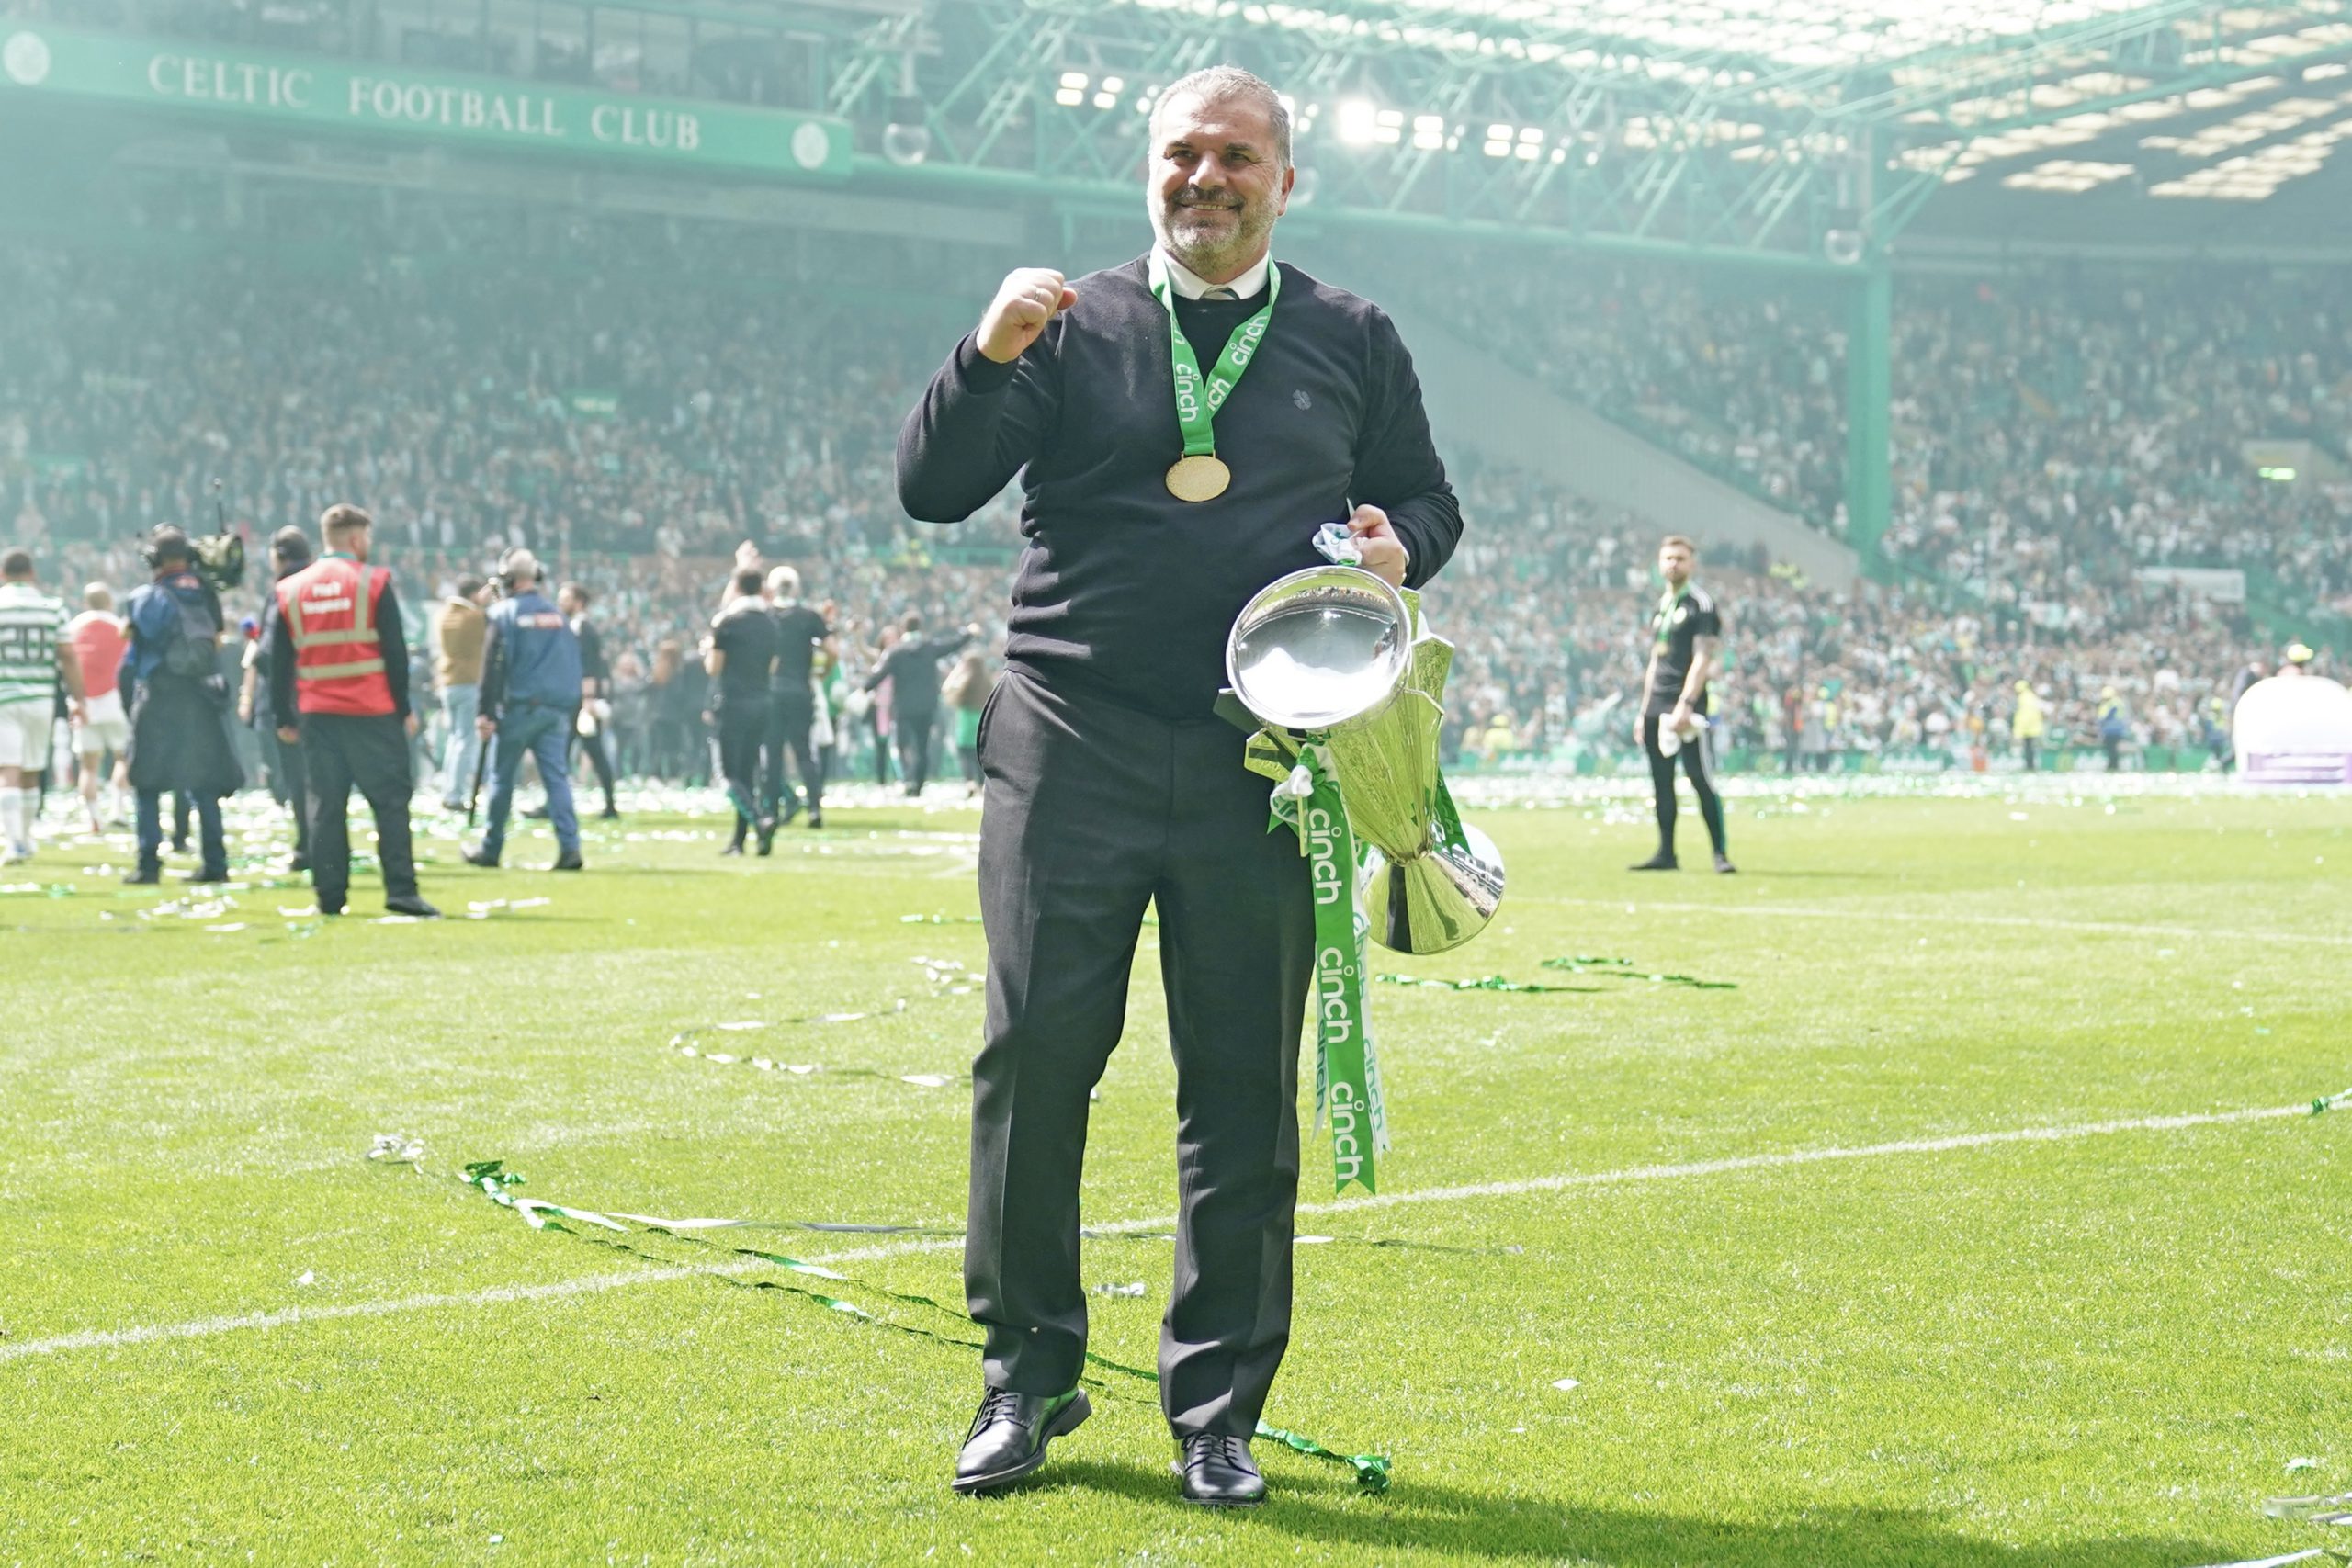 Celtic manager Ange Postecoglou celebrates with the league trophy after the cinch Premiership match at Celtic Park, Glasgow. Picture date: Saturday May 14, 2022.